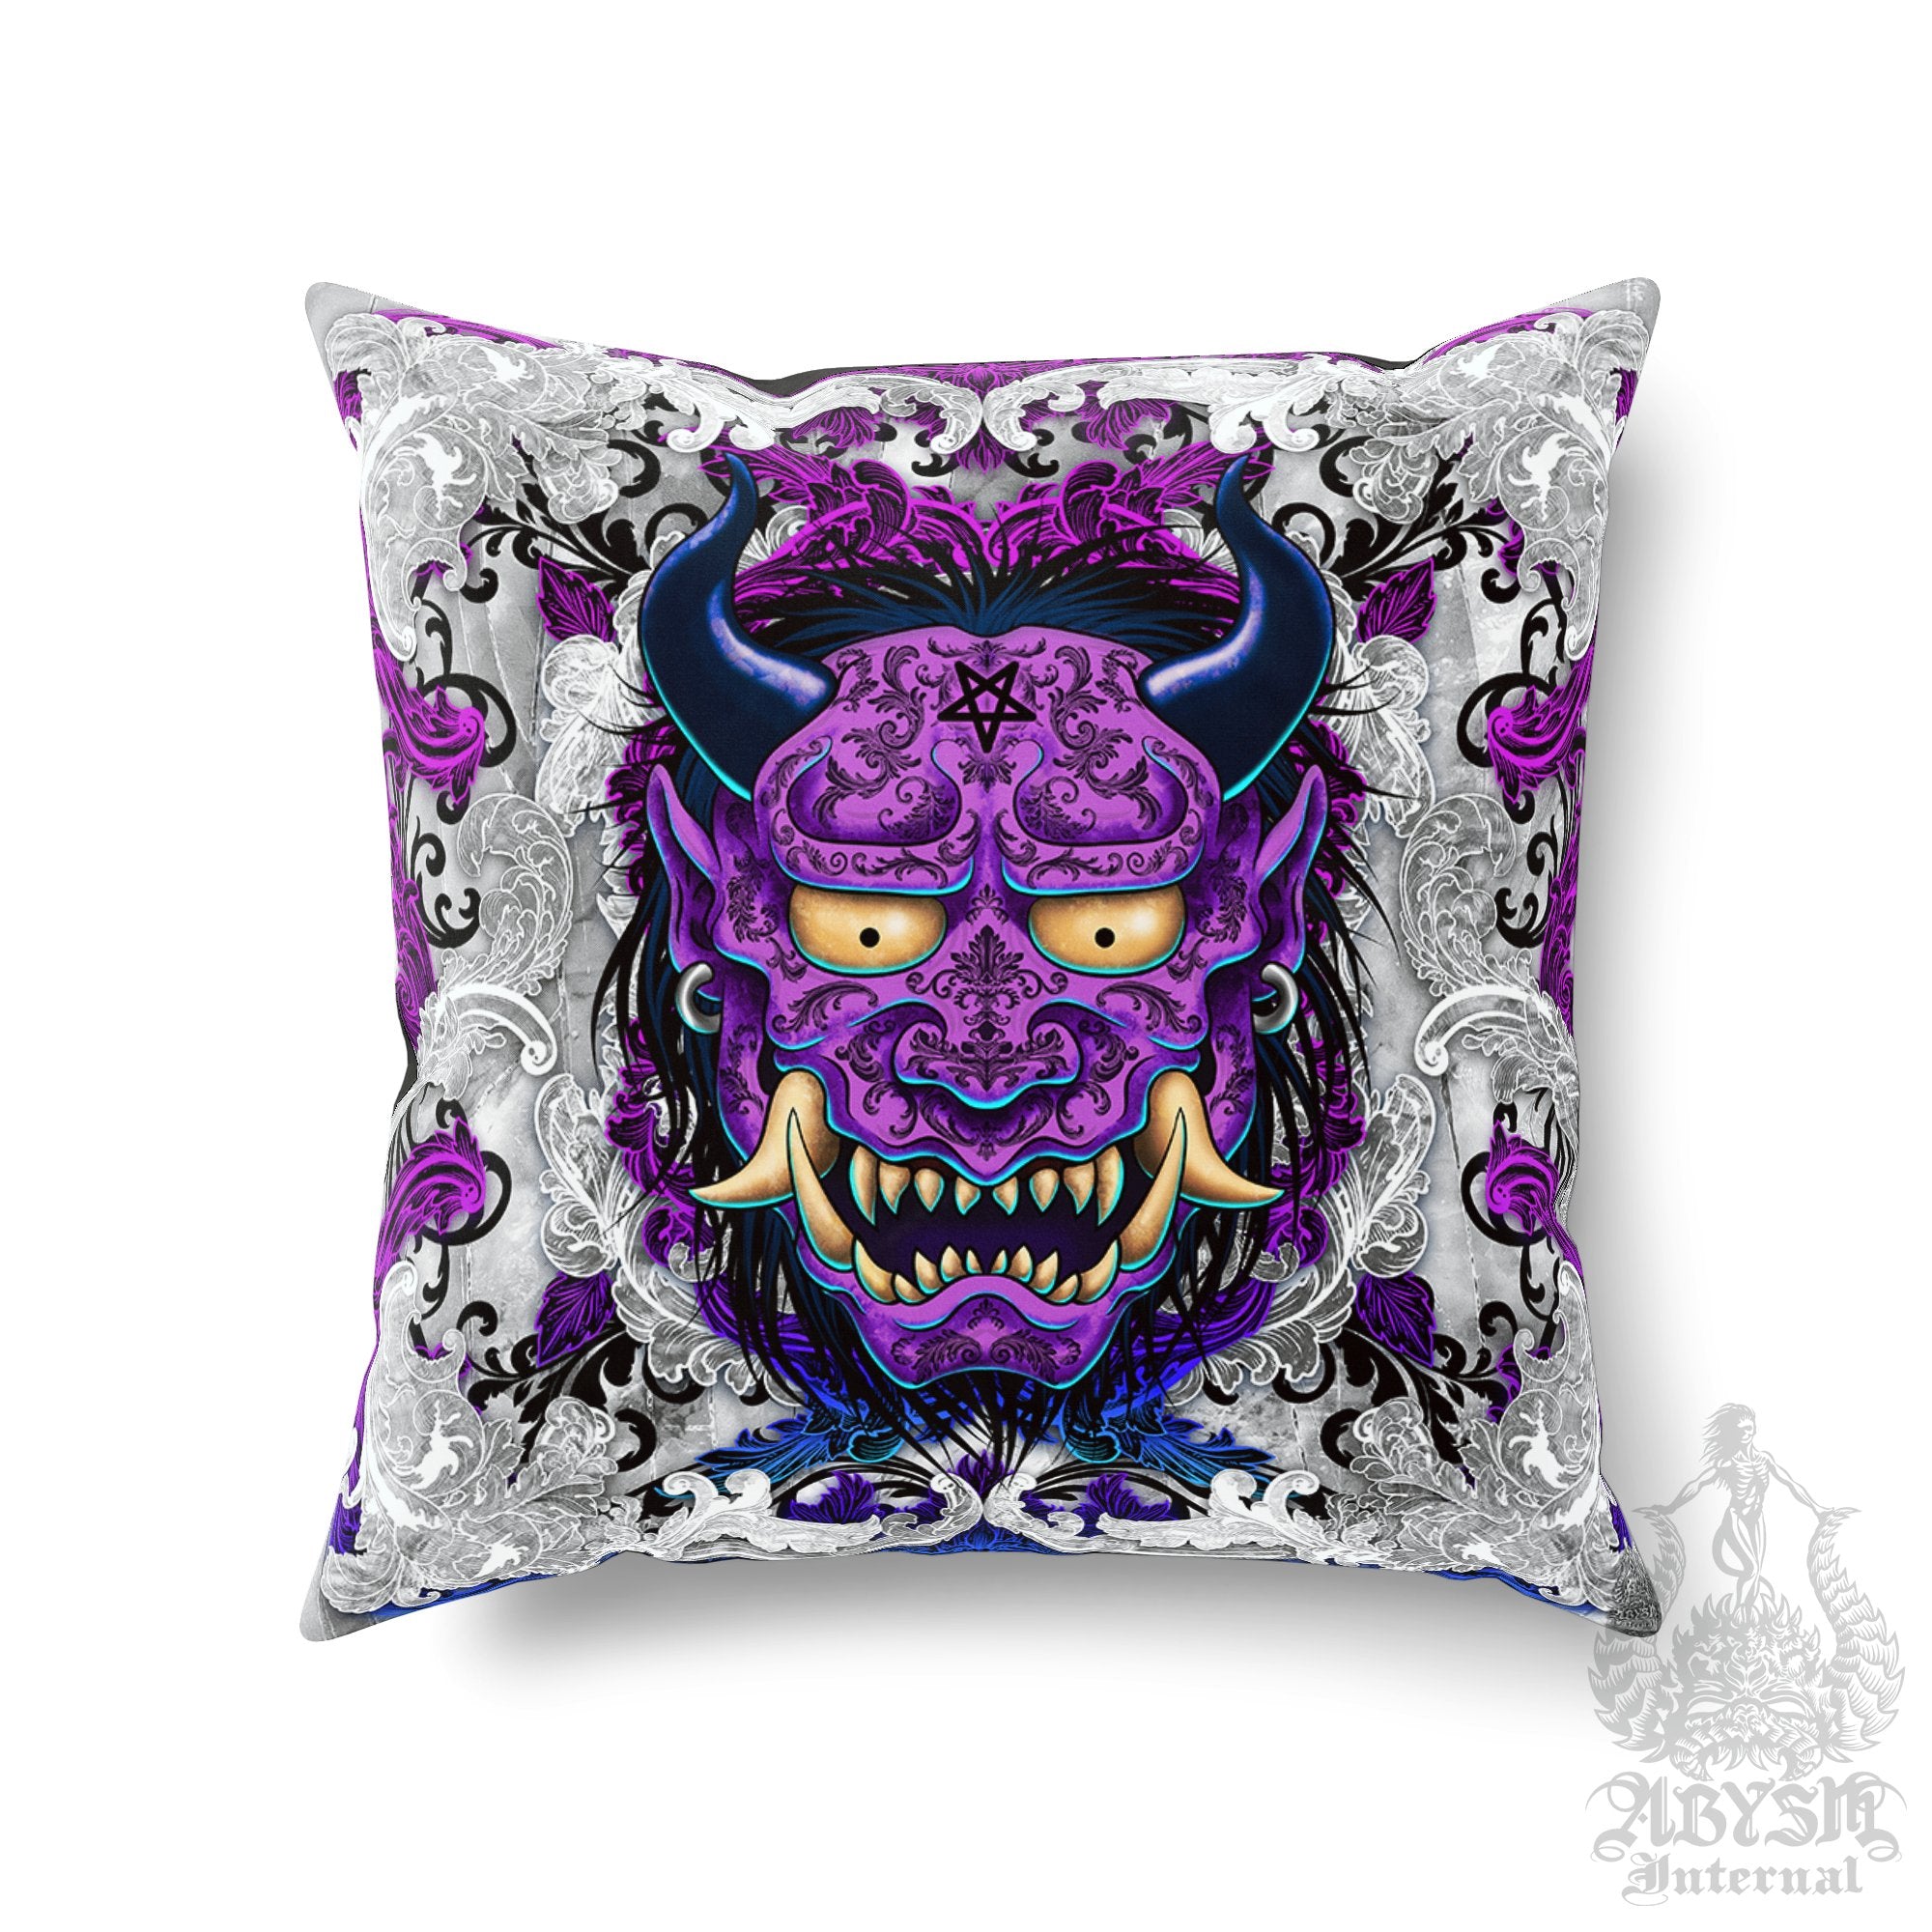 Oni Throw Pillow, Decorative Accent Pillow, Square Cushion Cover, Japanese Demon, Anime and Gamer Room Decor, Alternative Home - White Goth Purple, 2 Colors - Abysm Internal